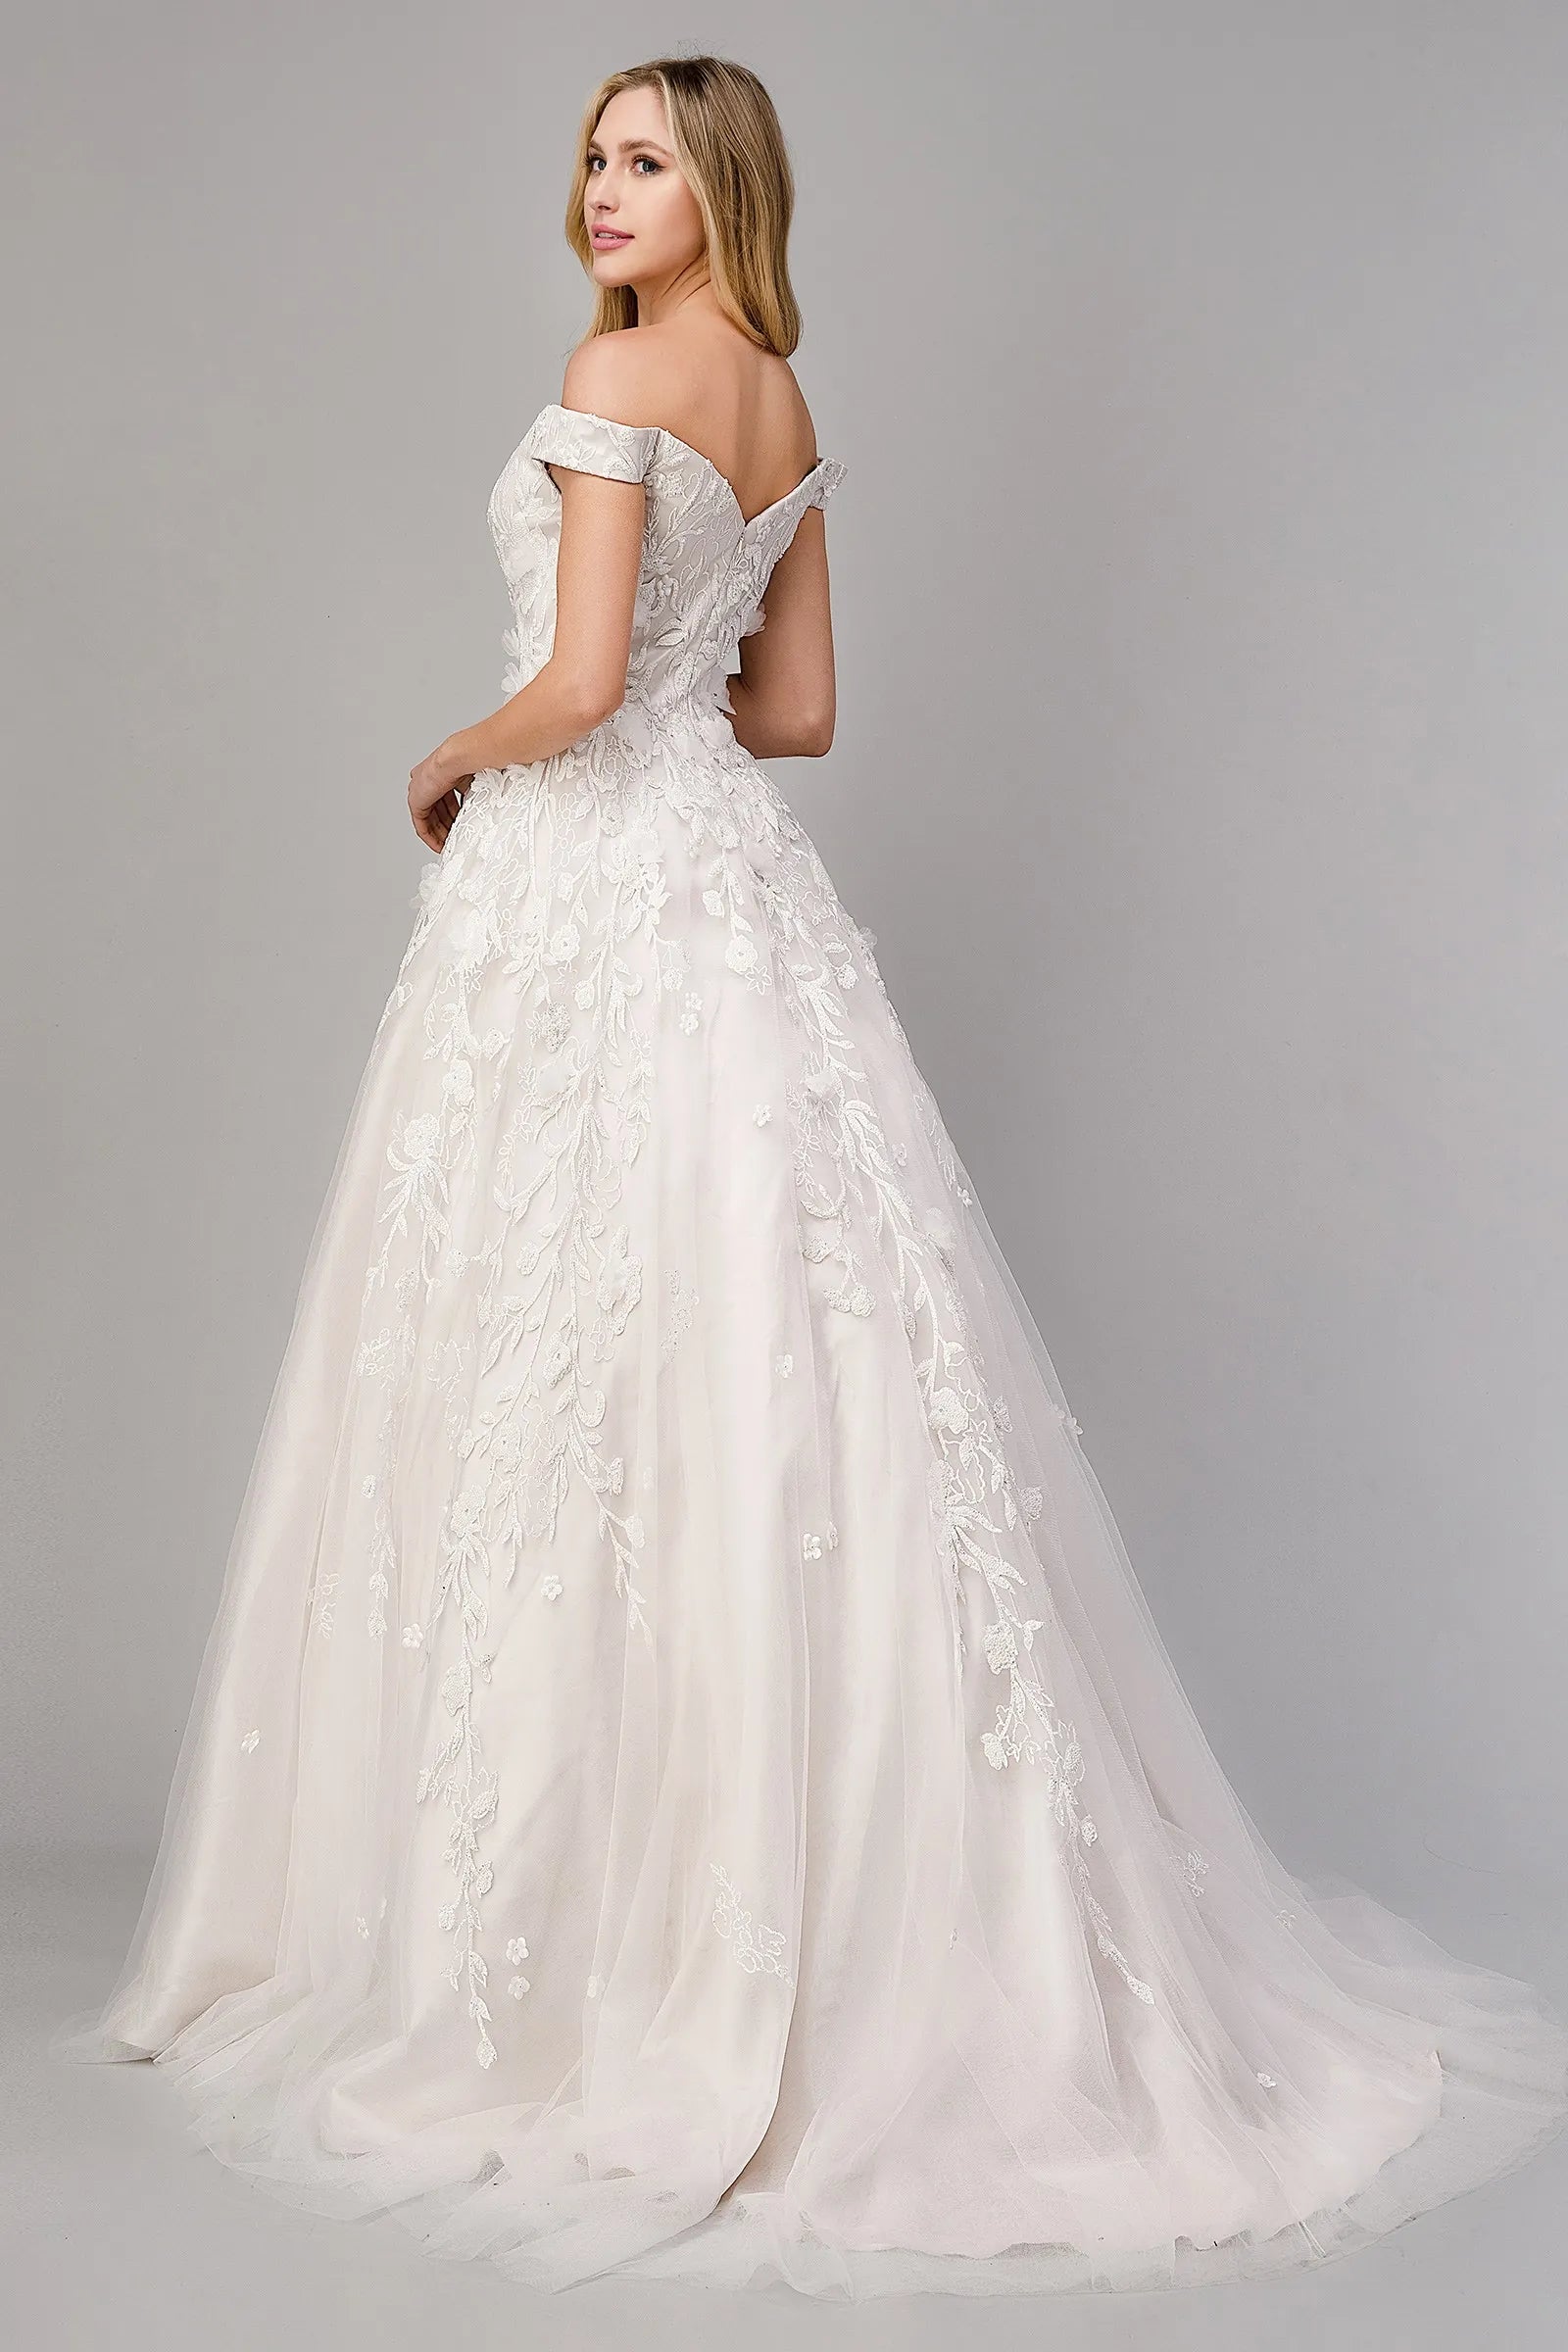 Peony Floral Wedding Dress with Cape Sleeves